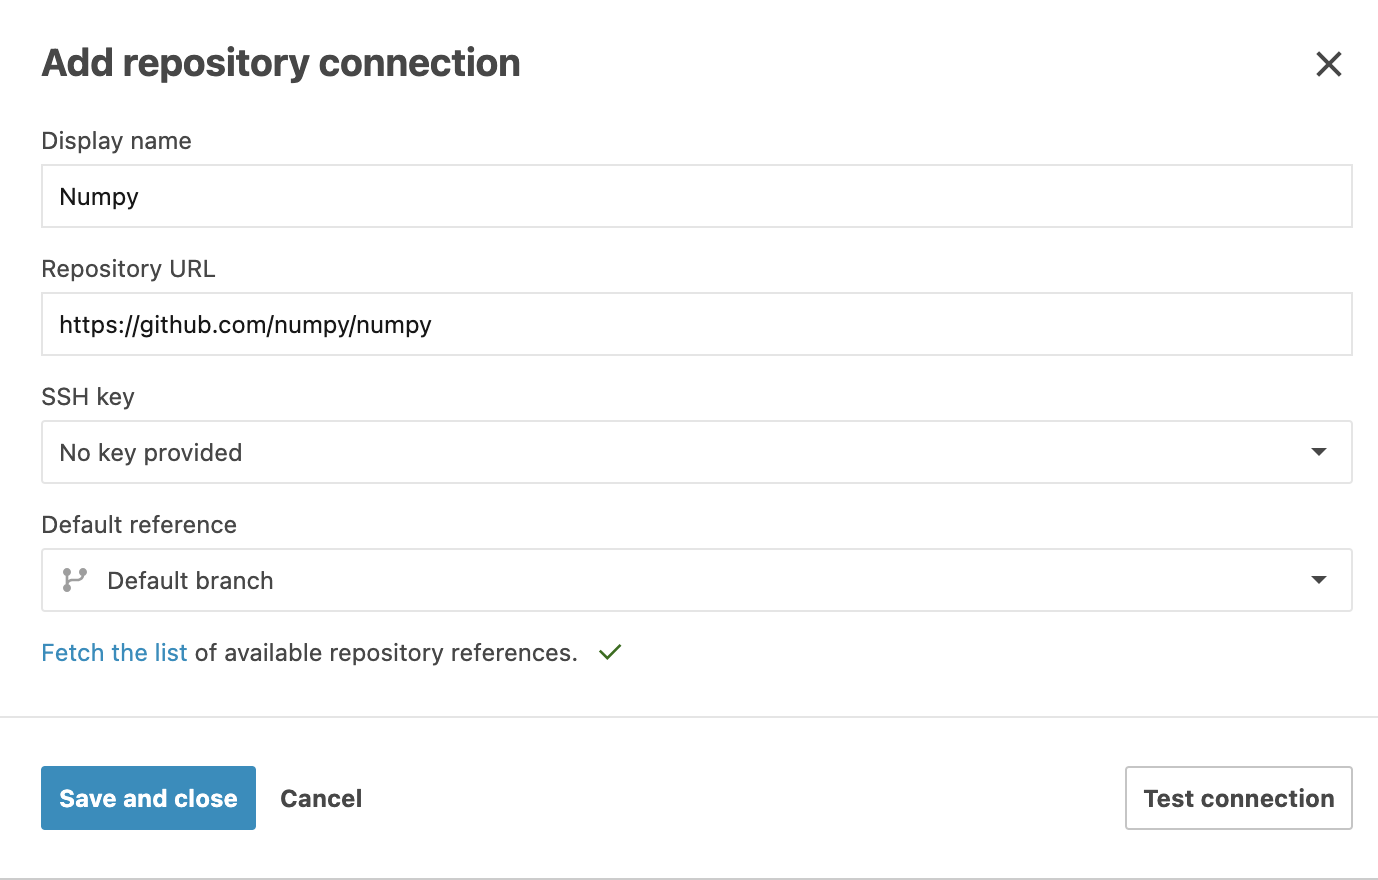 Add repository connection dialog